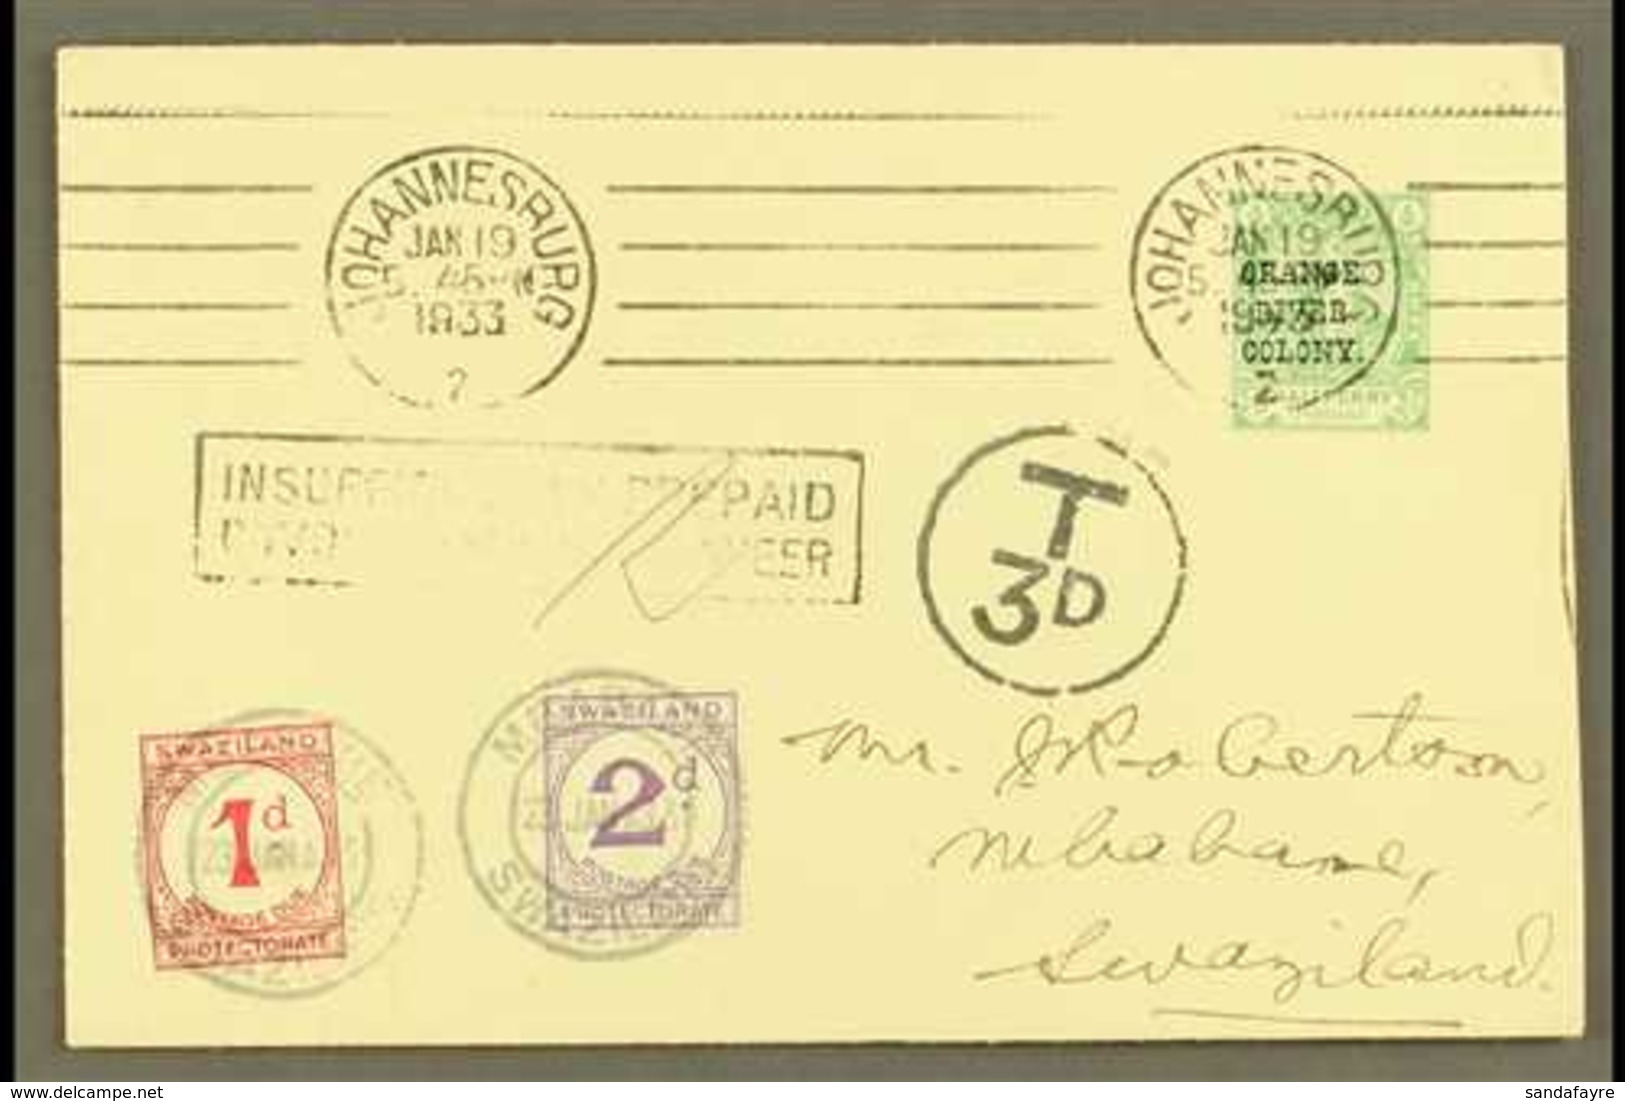 1933 POSTAGE DUE FIRST DAY COVER. 1933 (19 January) A Delightful And Highly Attractive Envelope Bearing Orange River Col - Swaziland (...-1967)